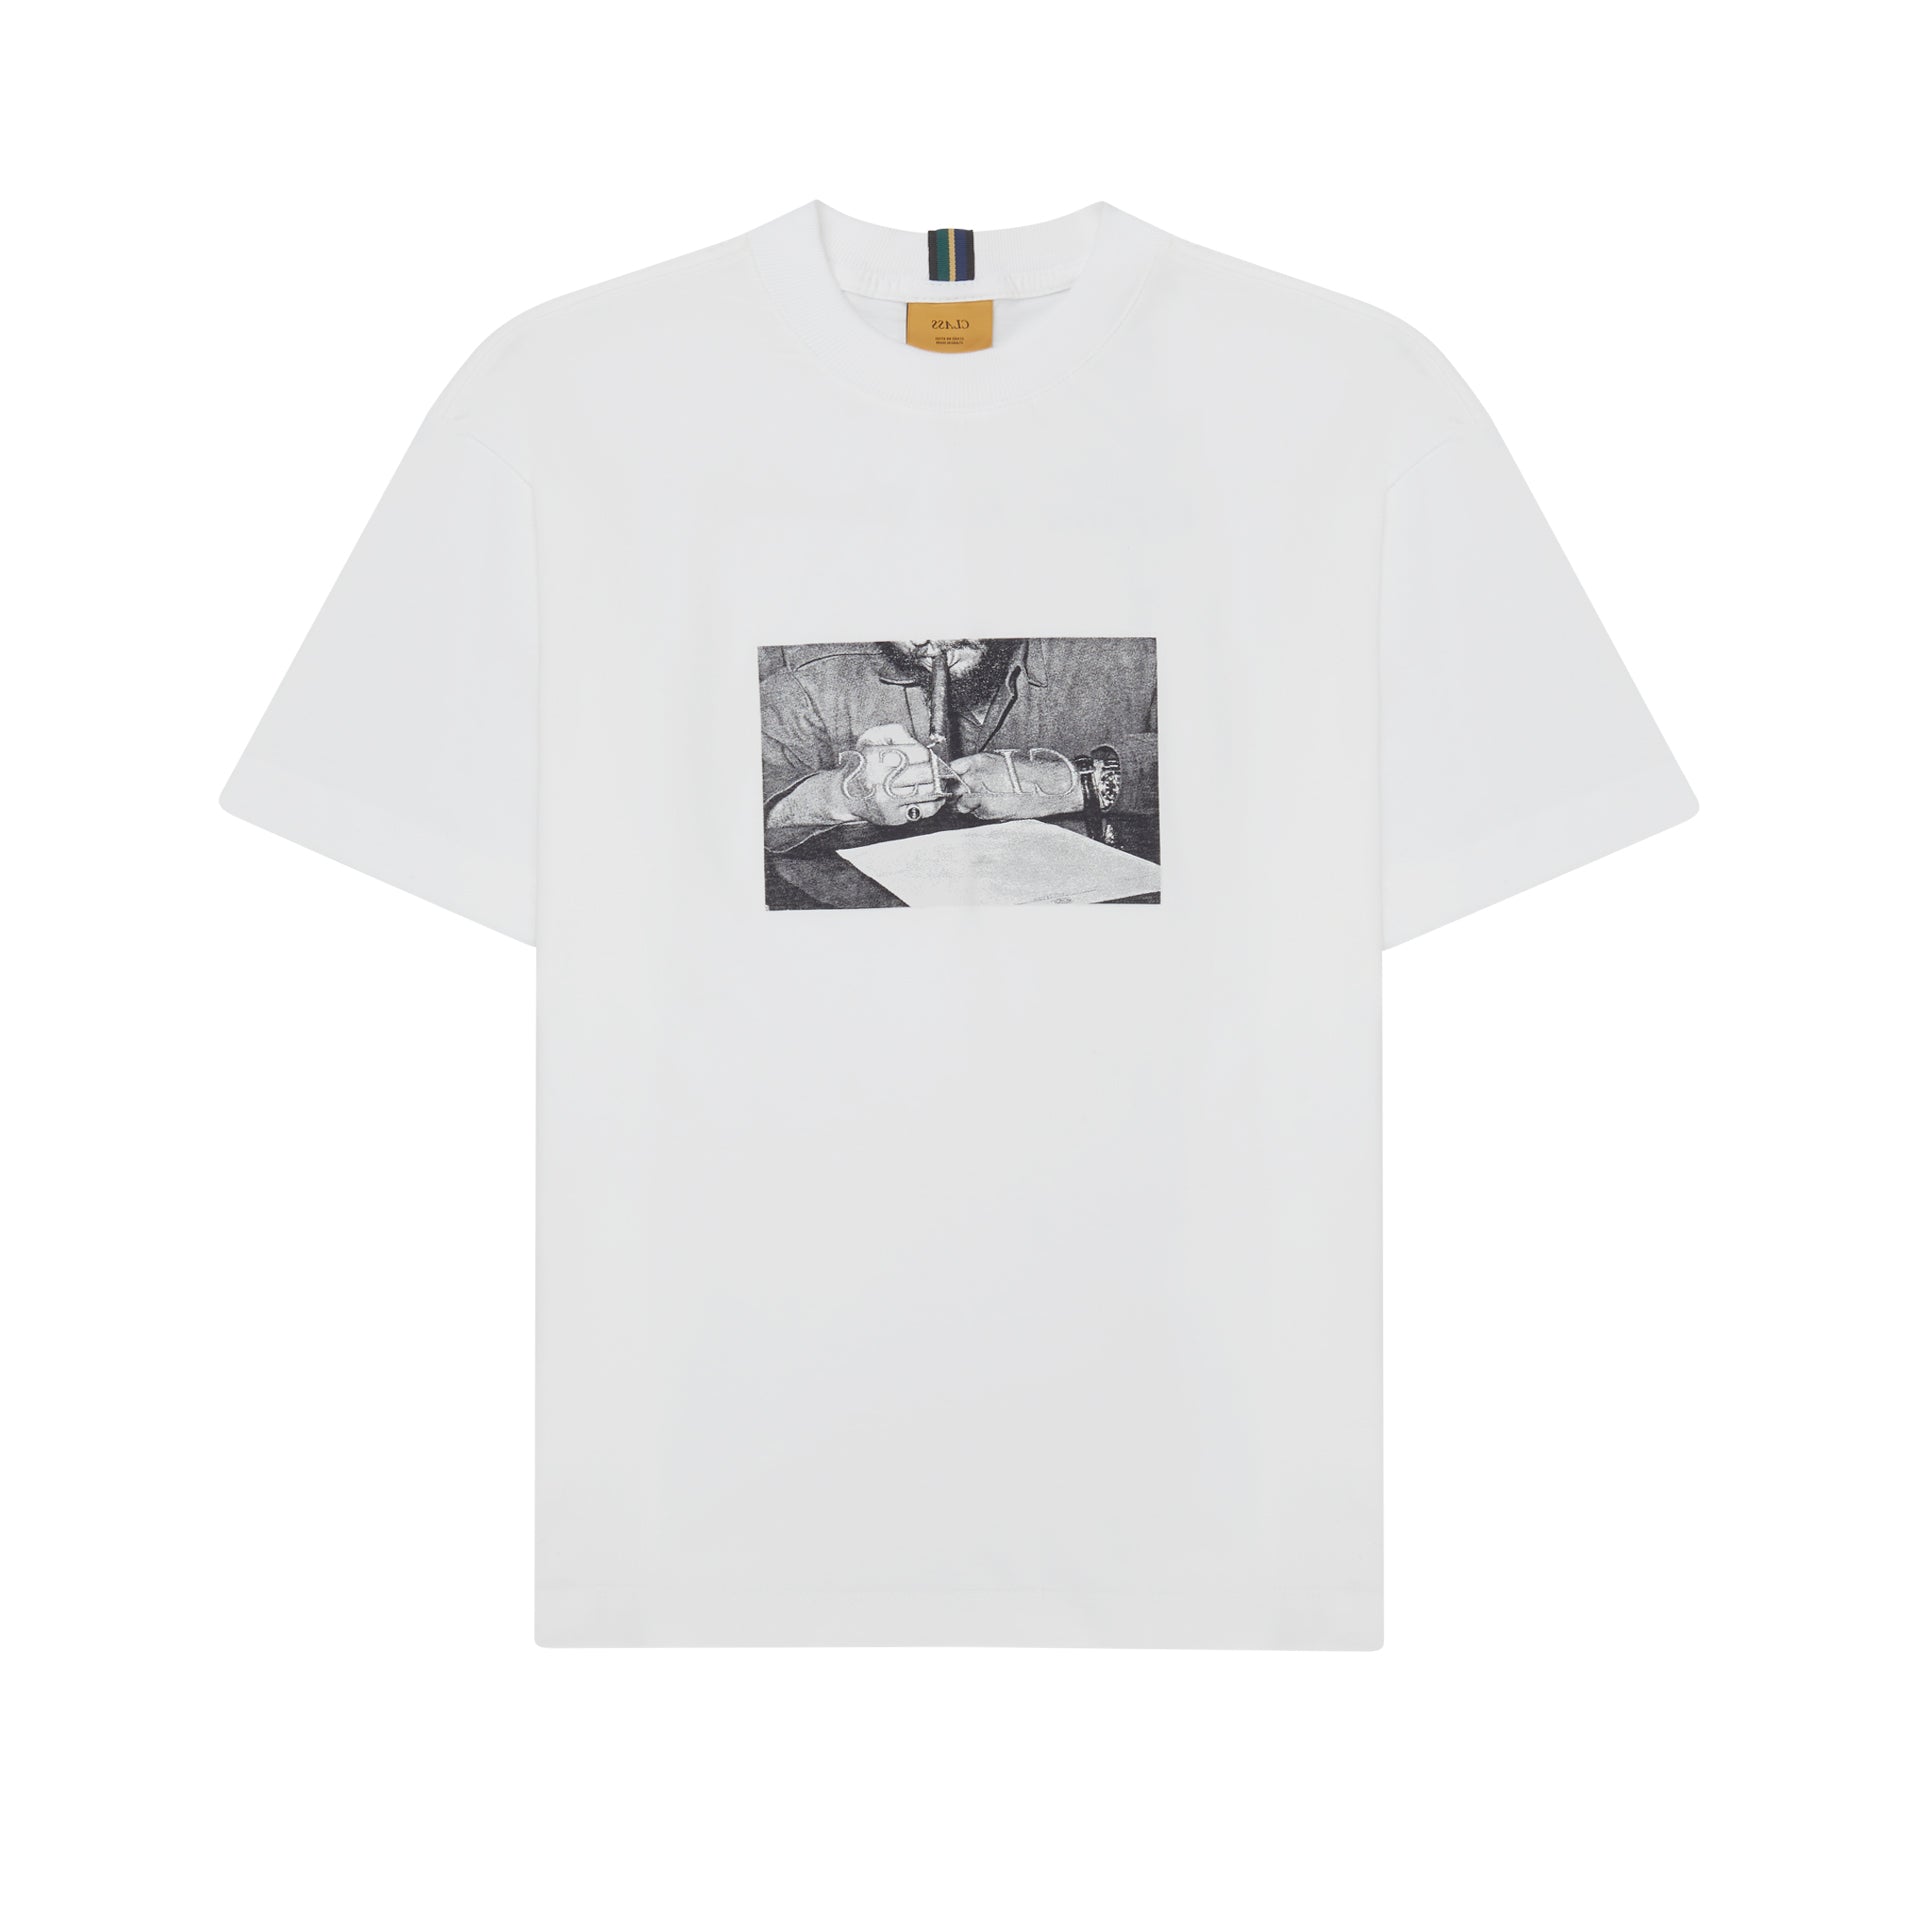 CLASS - T-Shirt A Time For Revolution Off White